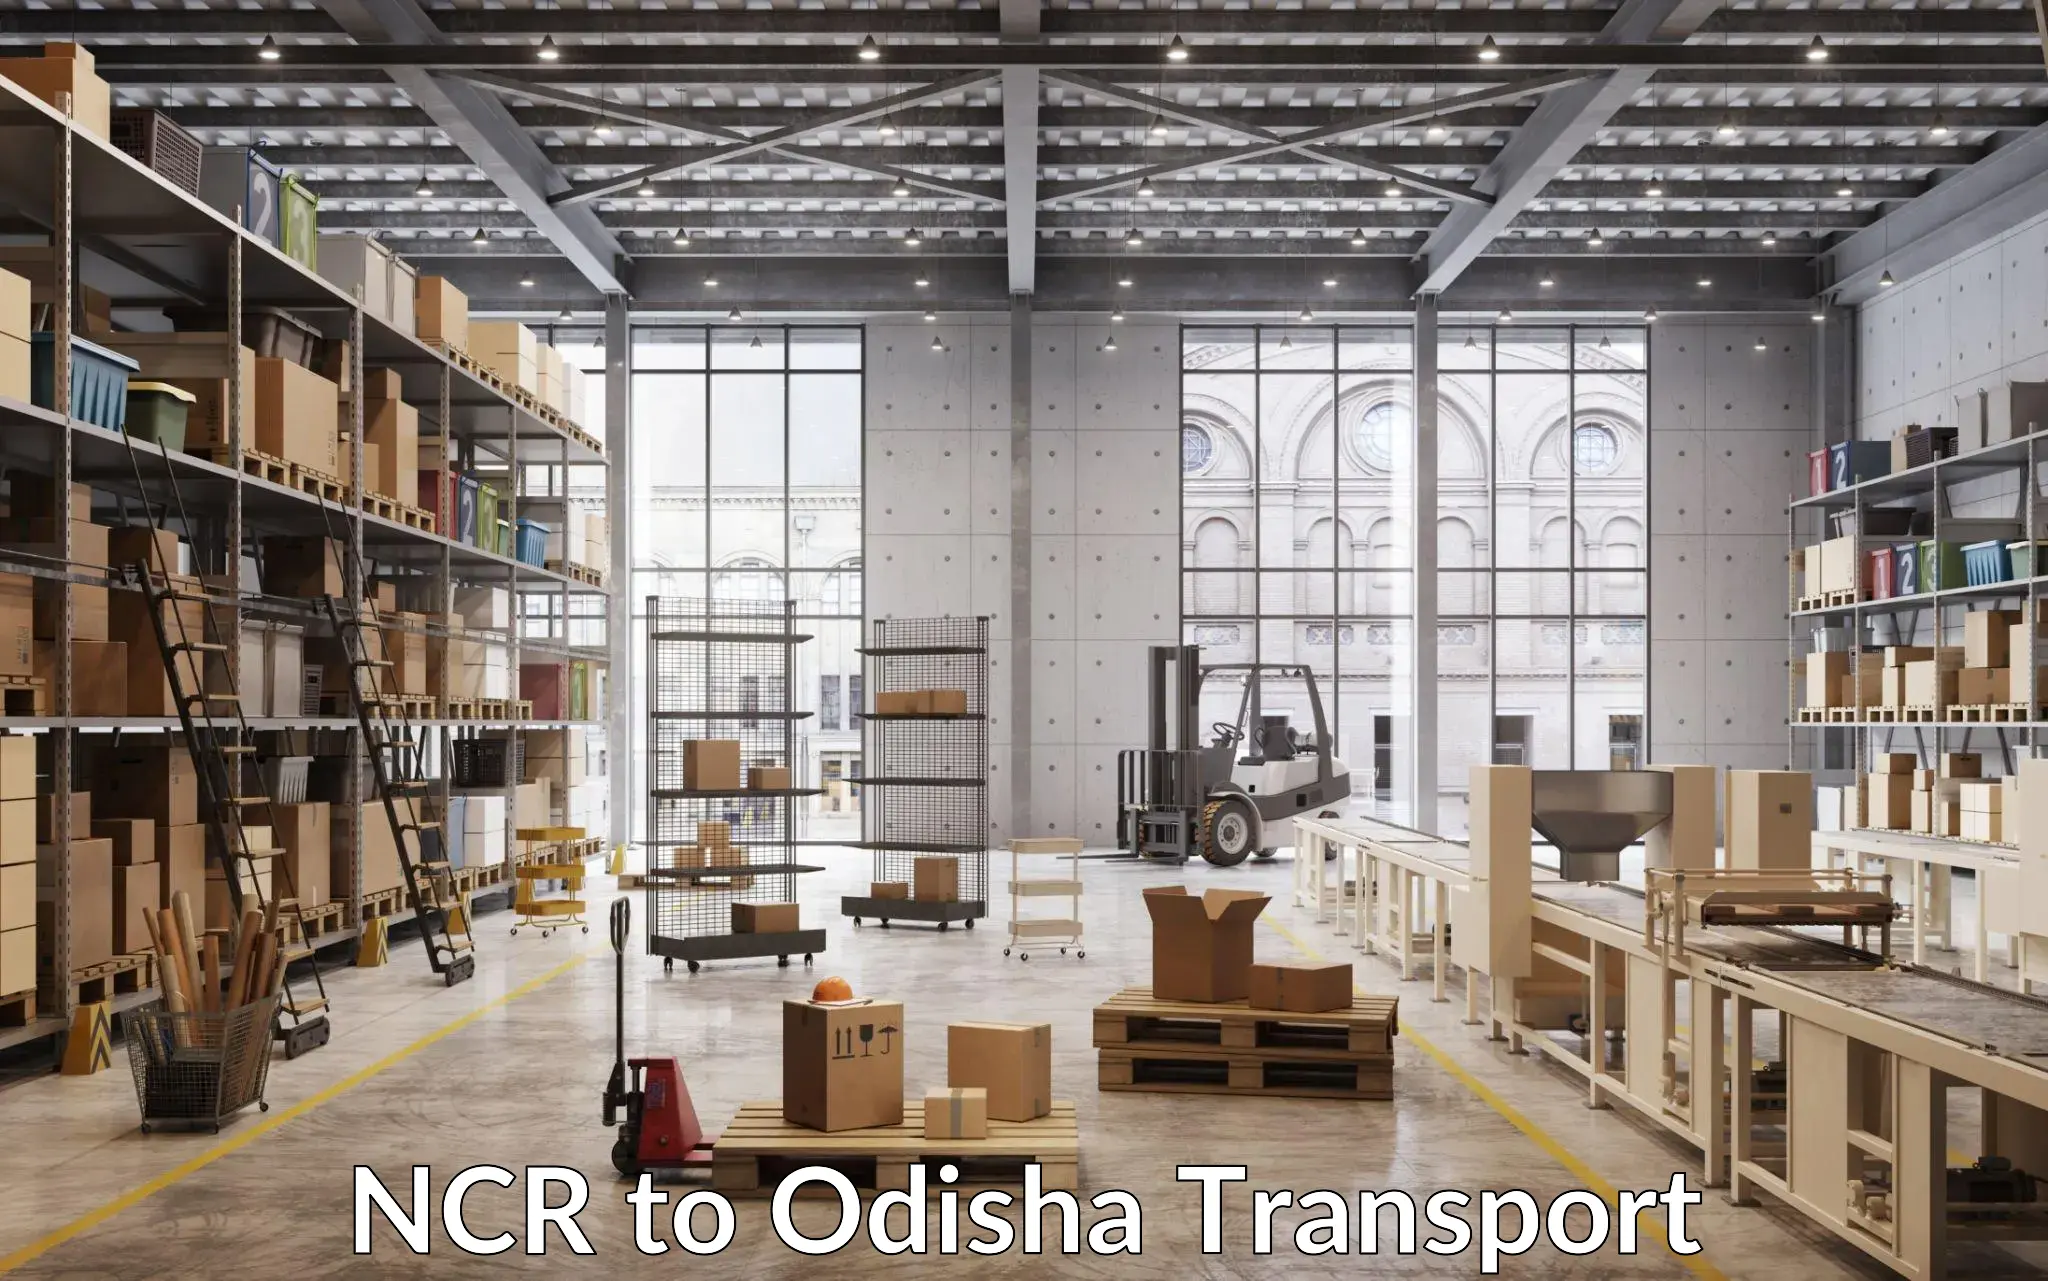 Daily transport service NCR to Bahalda